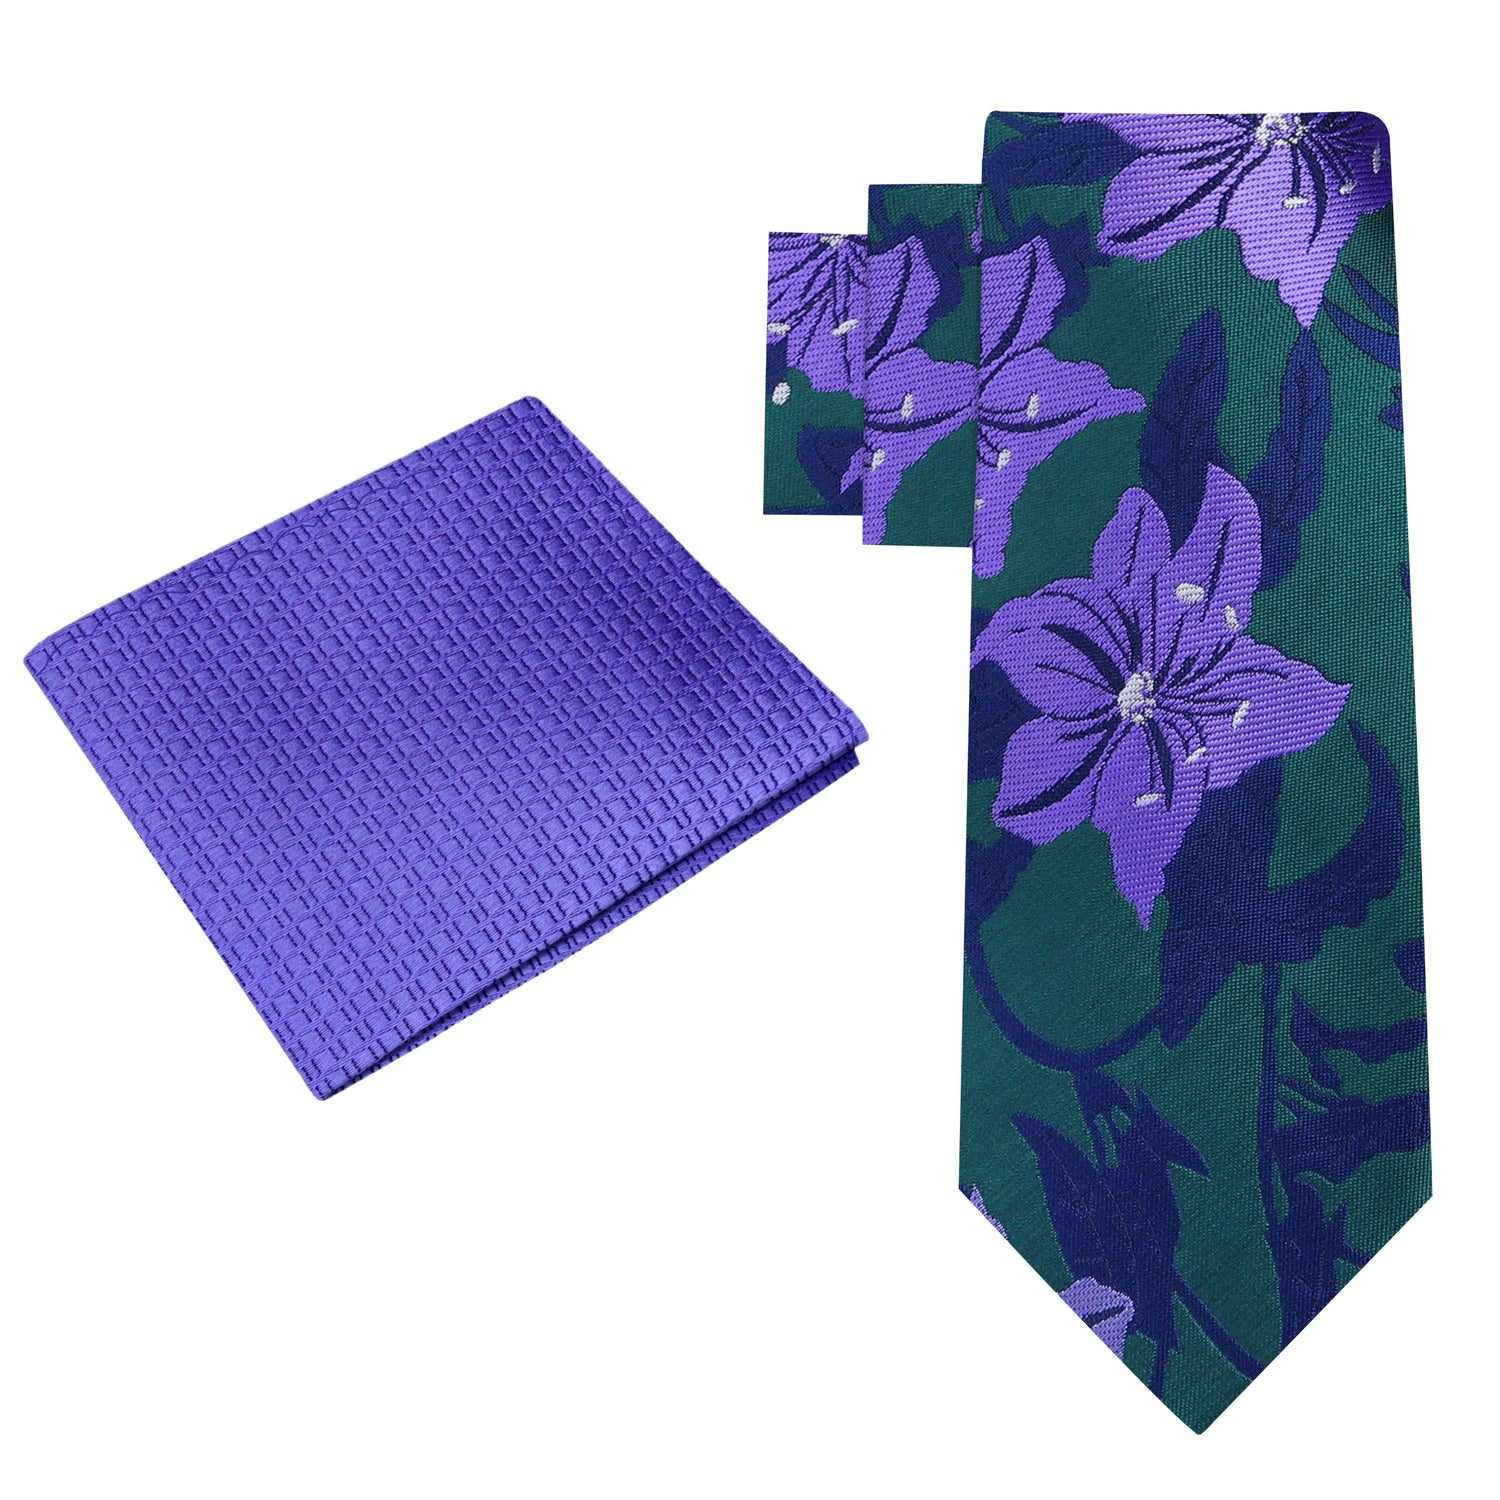 Alt View: Green, Purple and Blue Floral Tie and Square